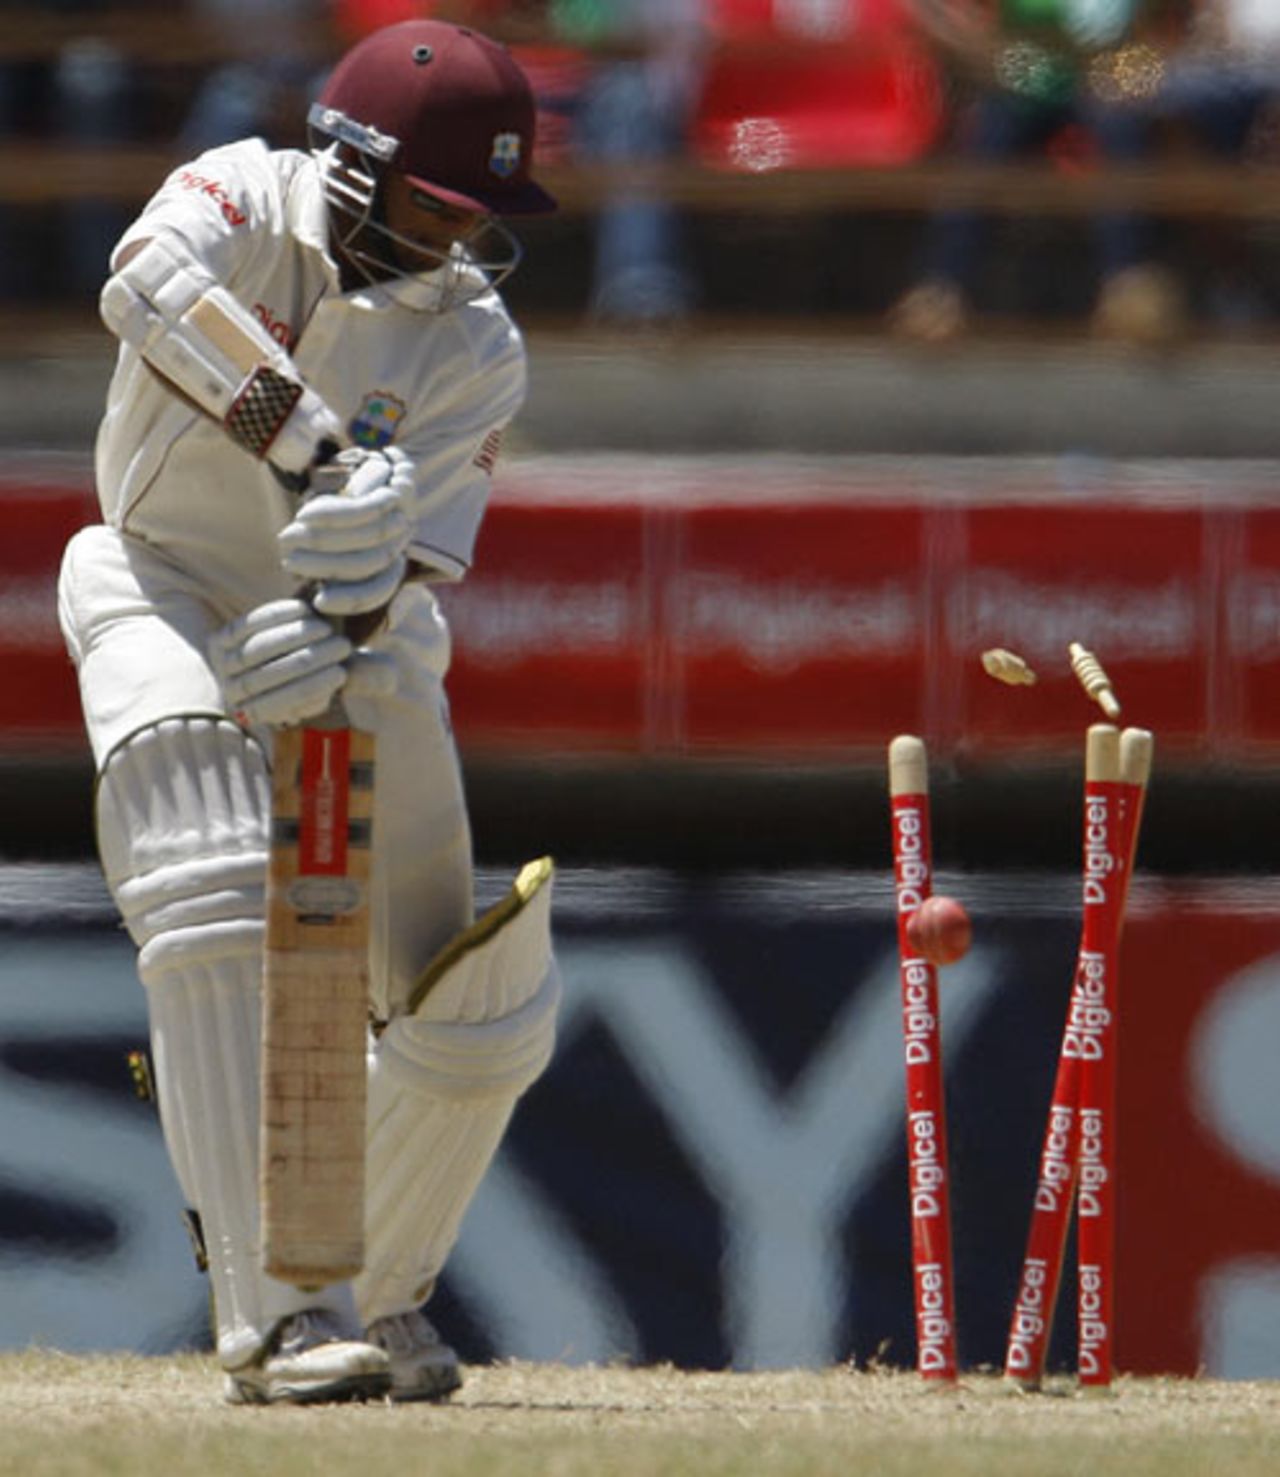 Shivnarine Chanderpaul sees his middle stump pegged back, West Indies v Sri Lanka, 1st Test, Guyana, 5th day, March 26, 2008